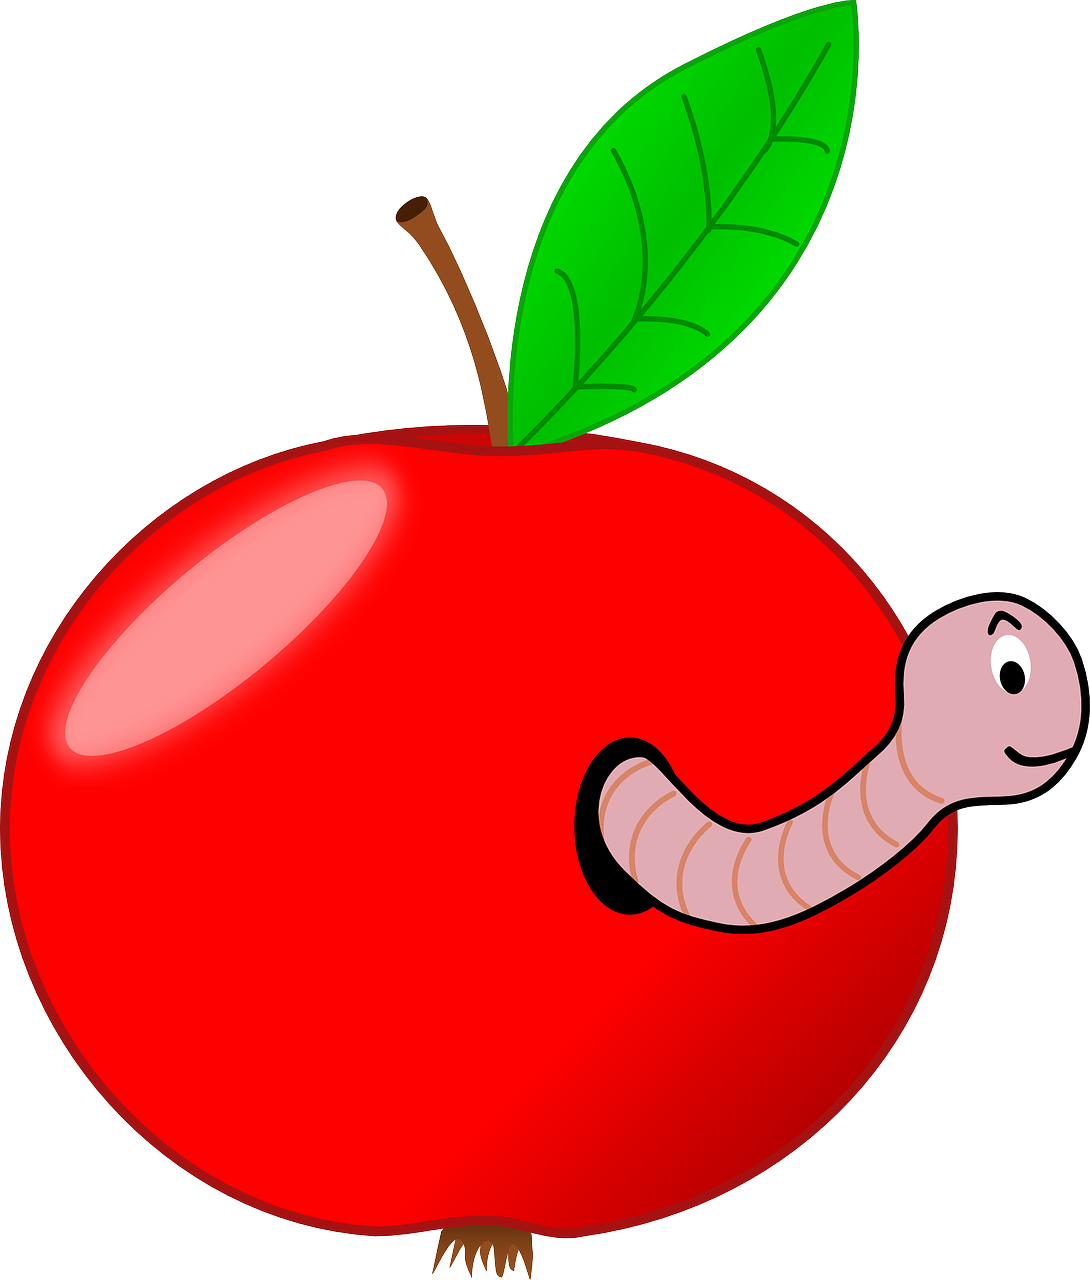 worm in the apple